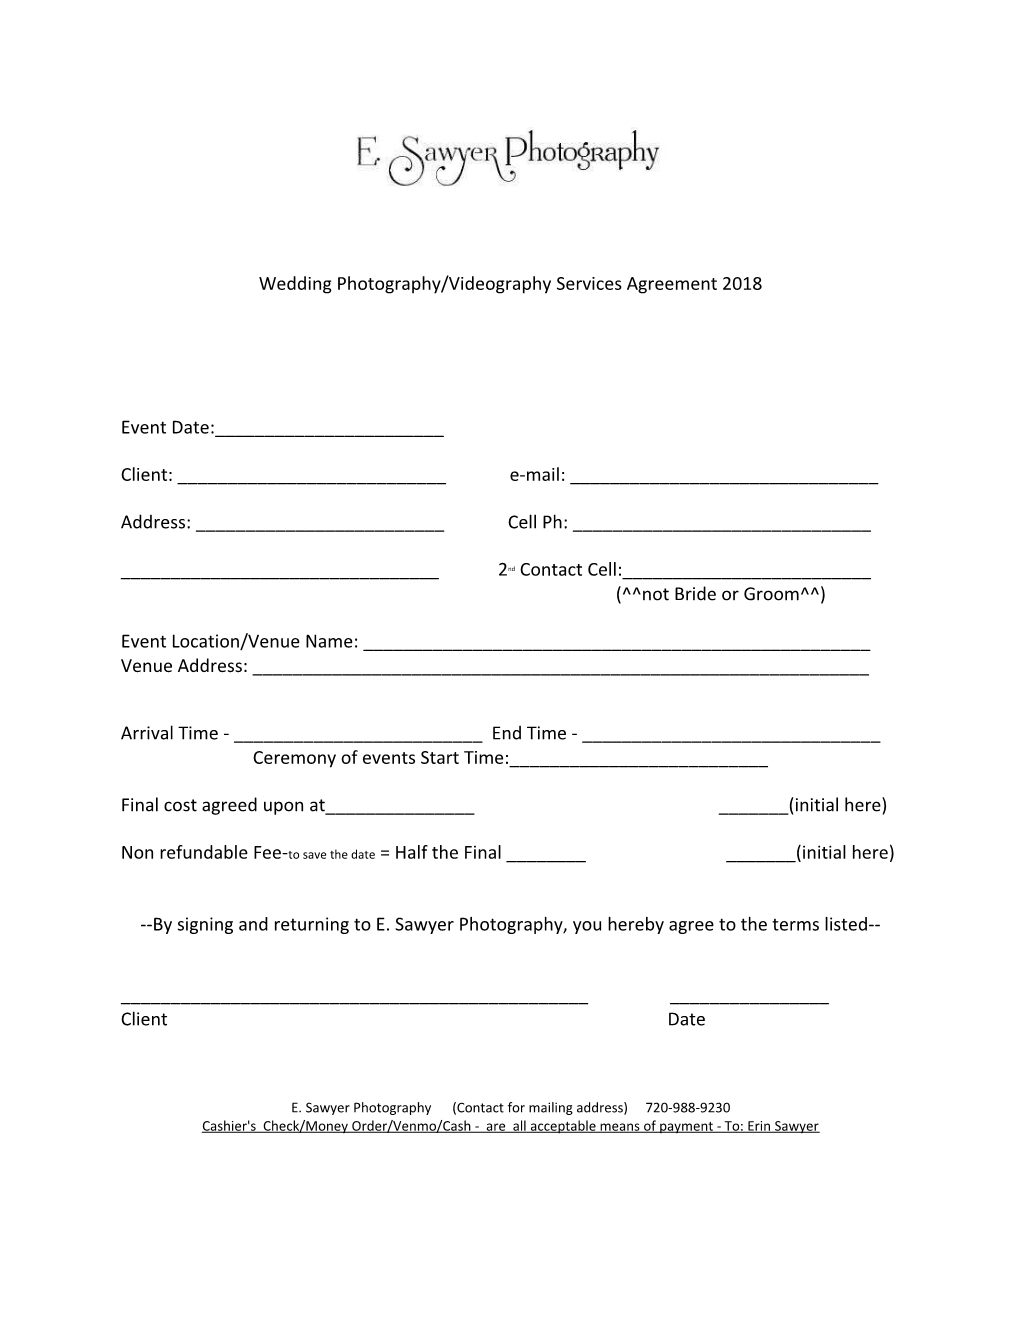 Wedding Photography/Videography Services Agreement 2018